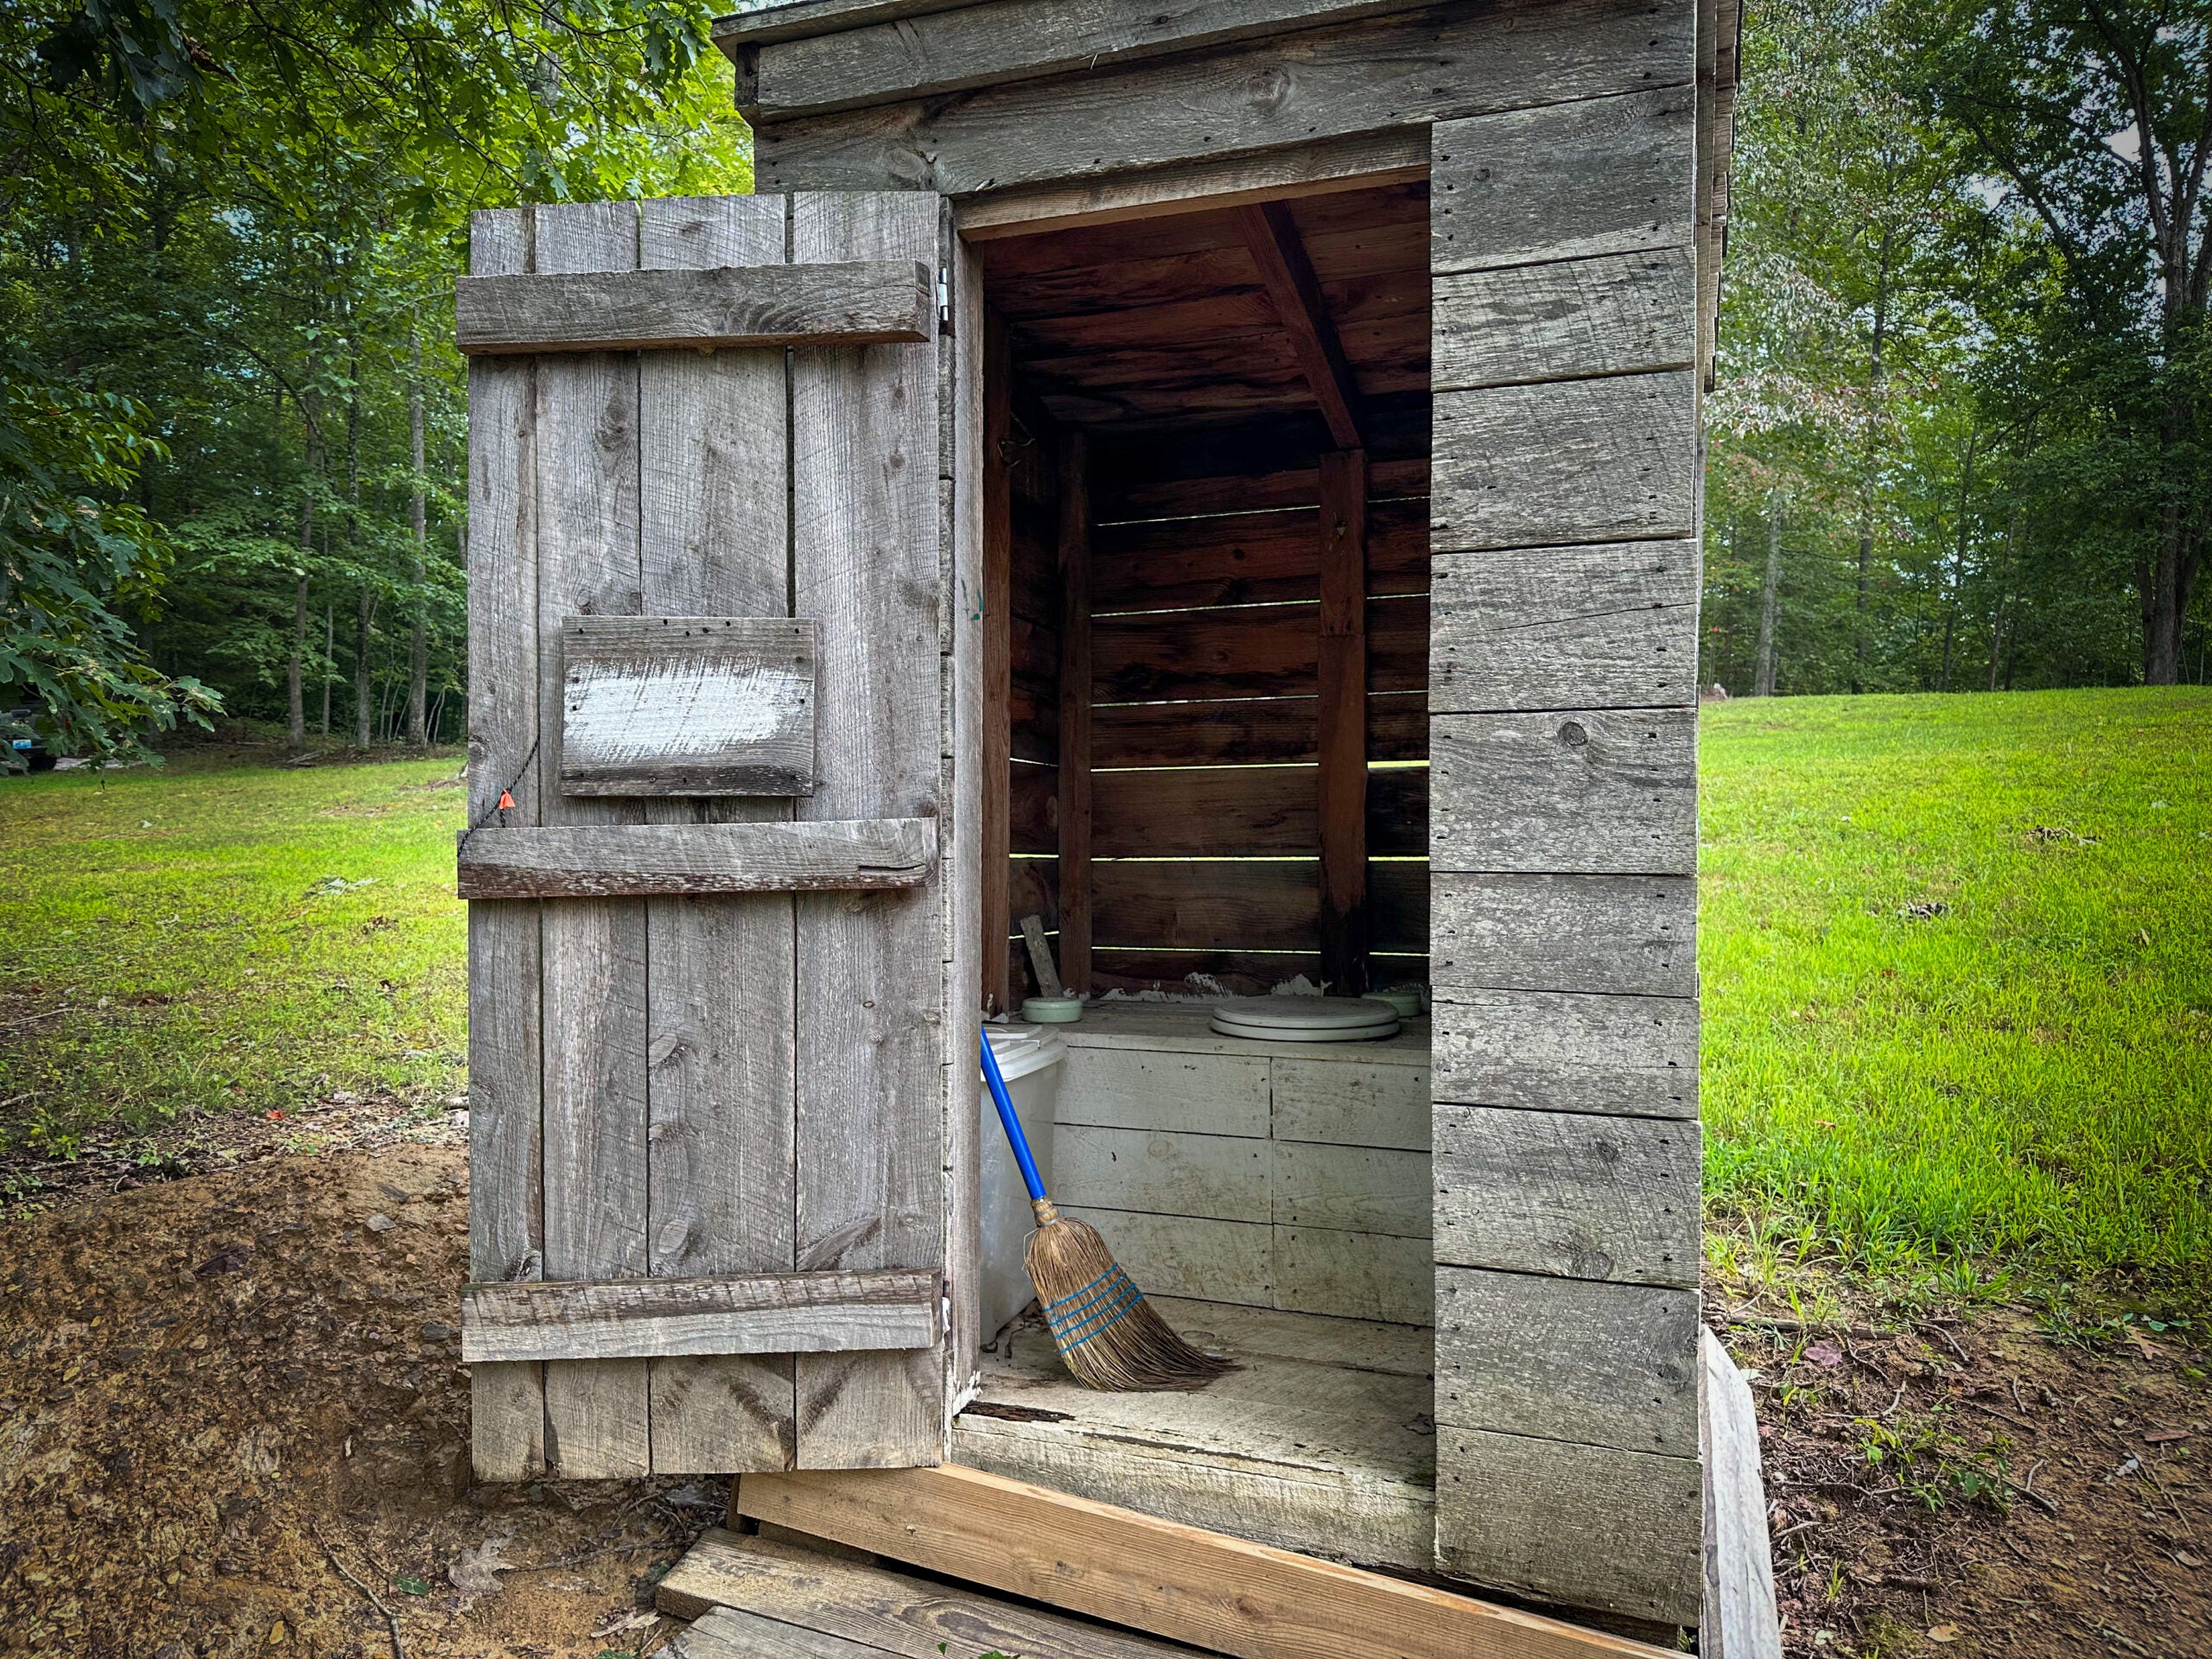 A small wooden outhouse with the door open, in front of a patch of green grass.